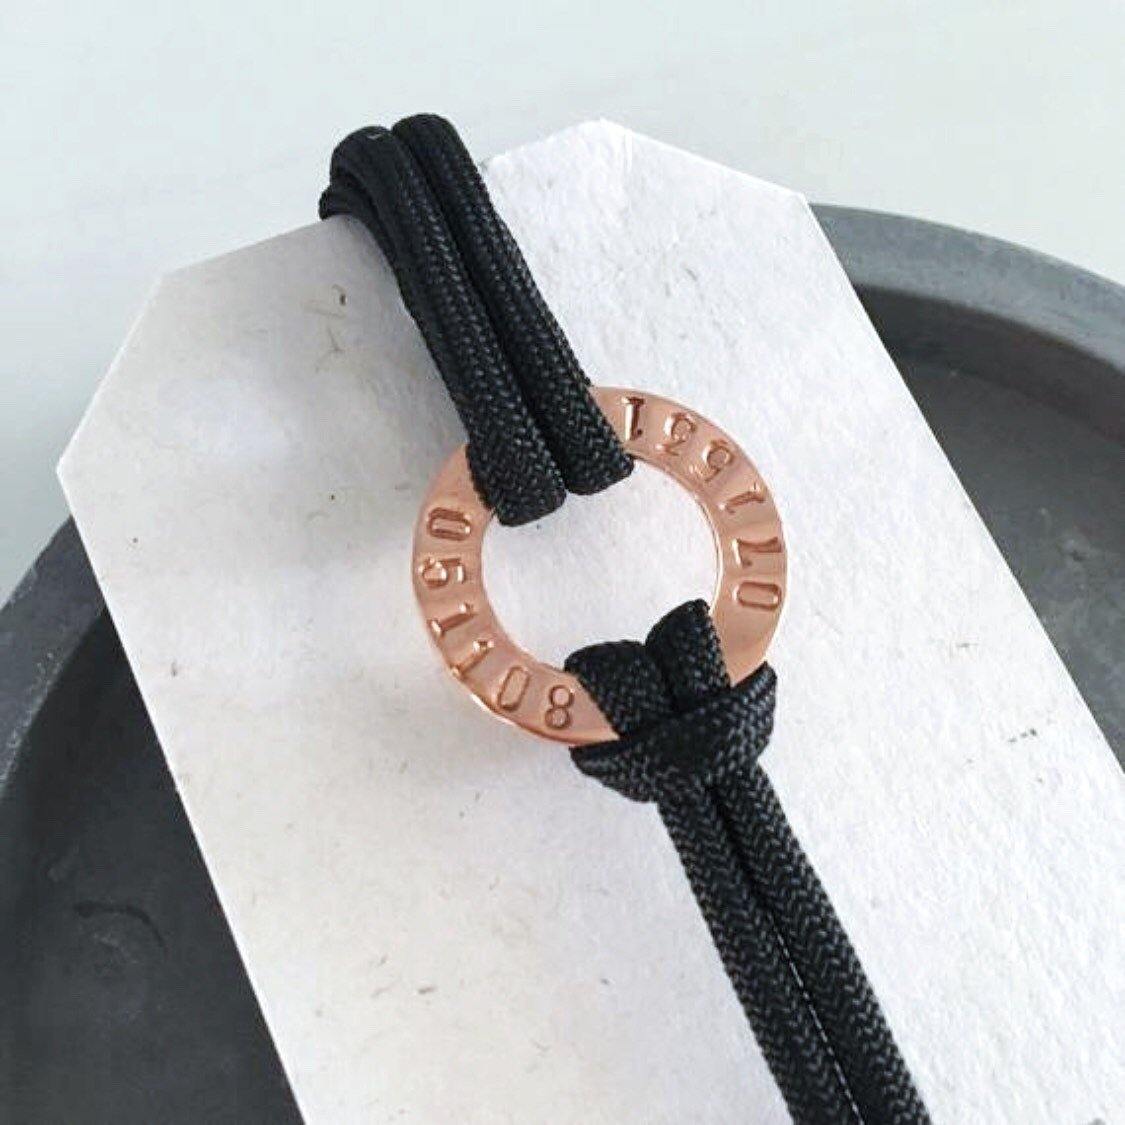 Men's Bracelet, Personalised Bracelet, Washer Bracelet, Copper Bracelet, Hand Stamped, Men's Jewellery, Dad Gift, 7th anniversary gift - The Little Stamping Co.